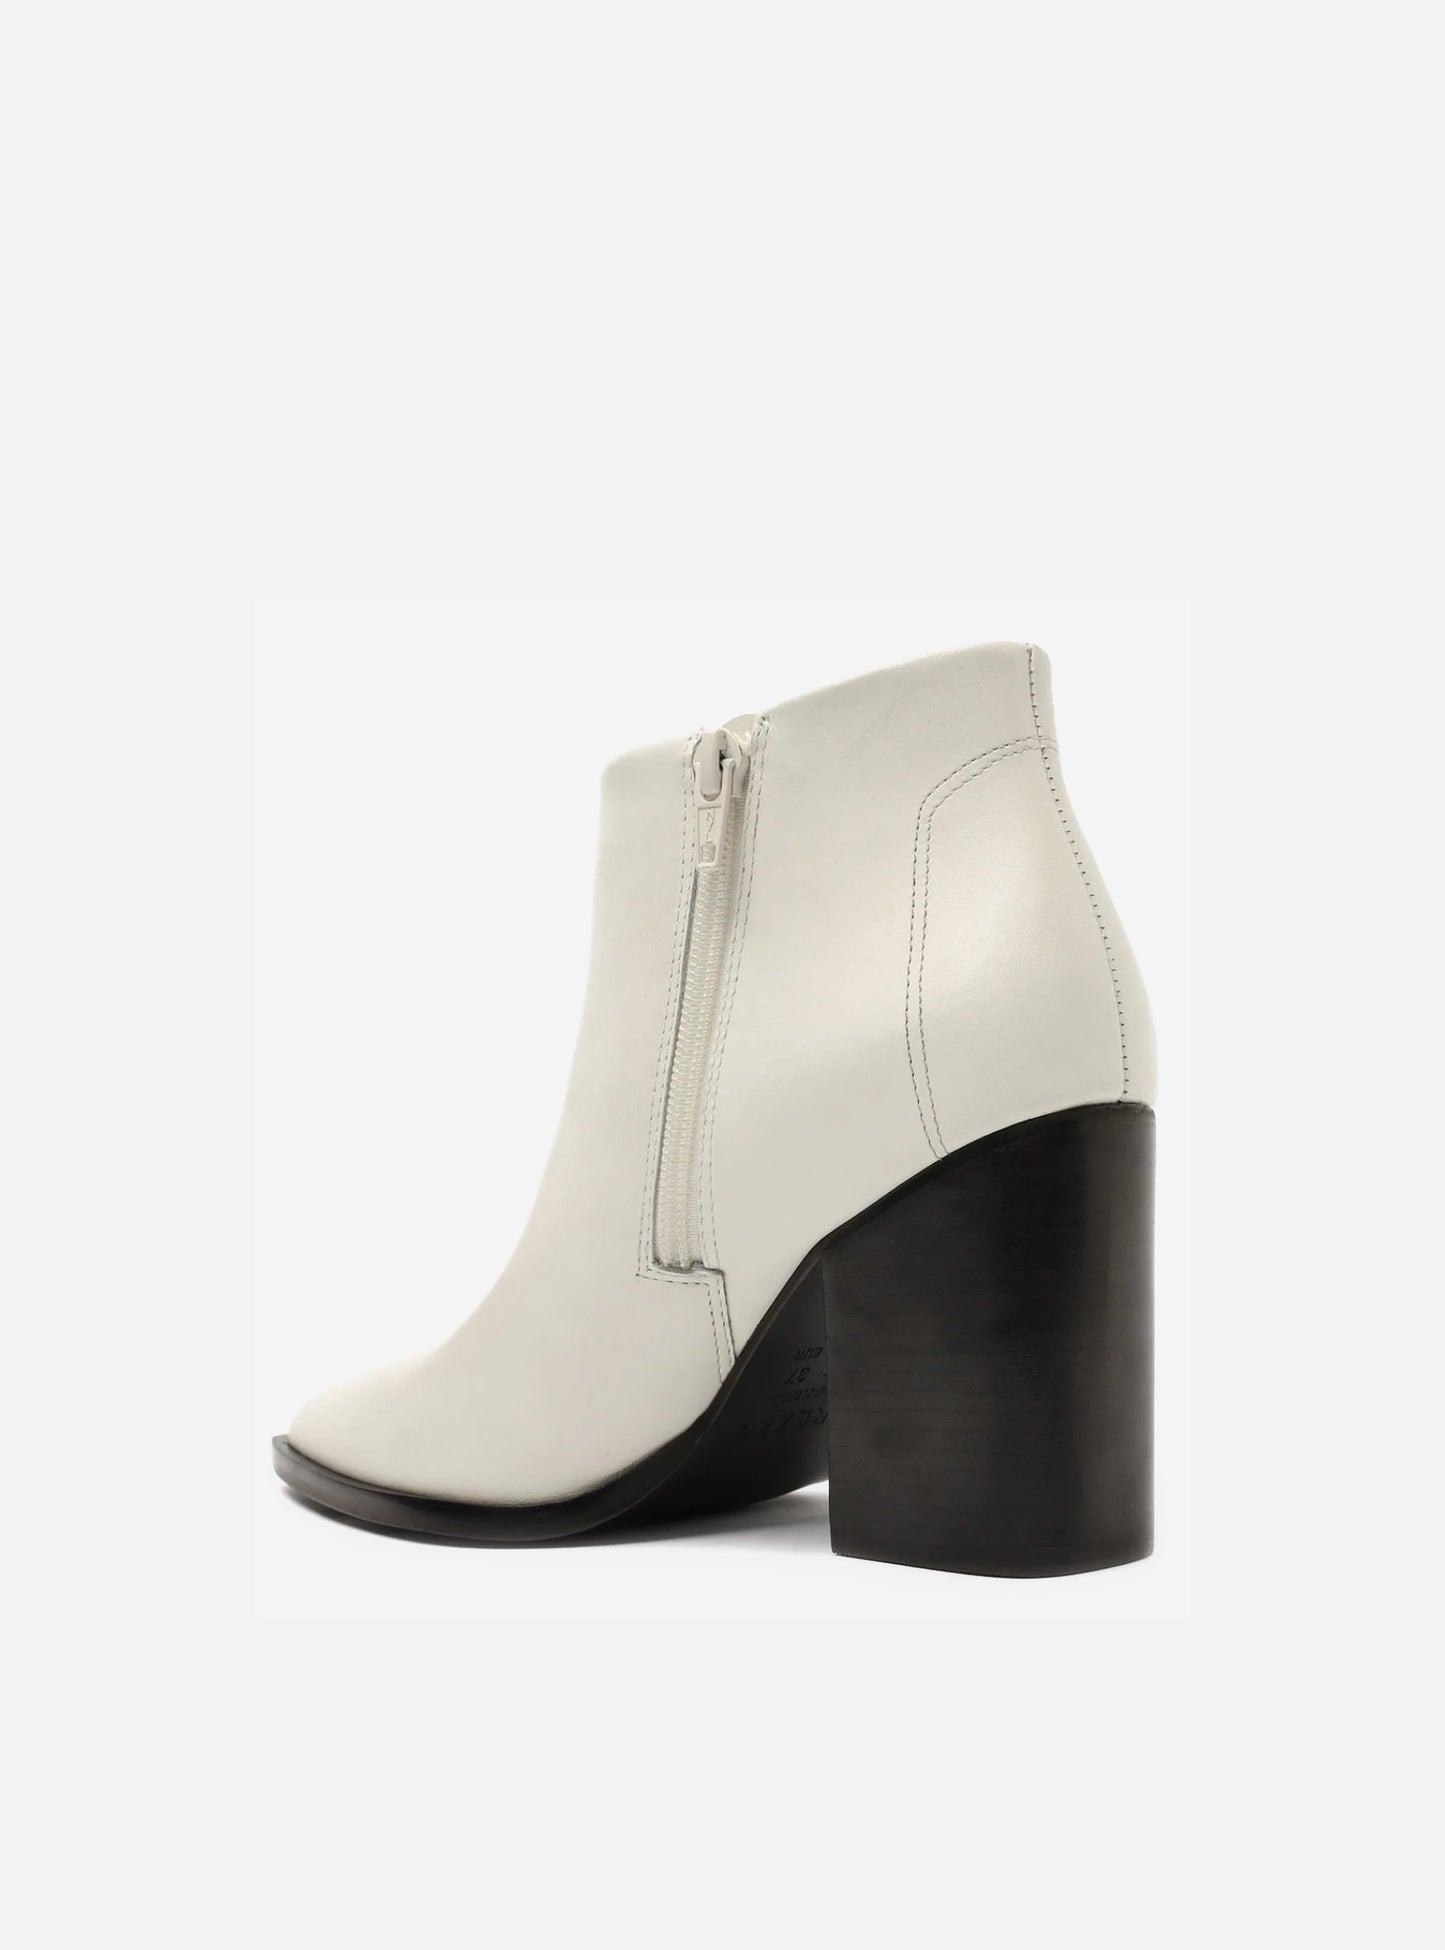 Cora Leather Bootie